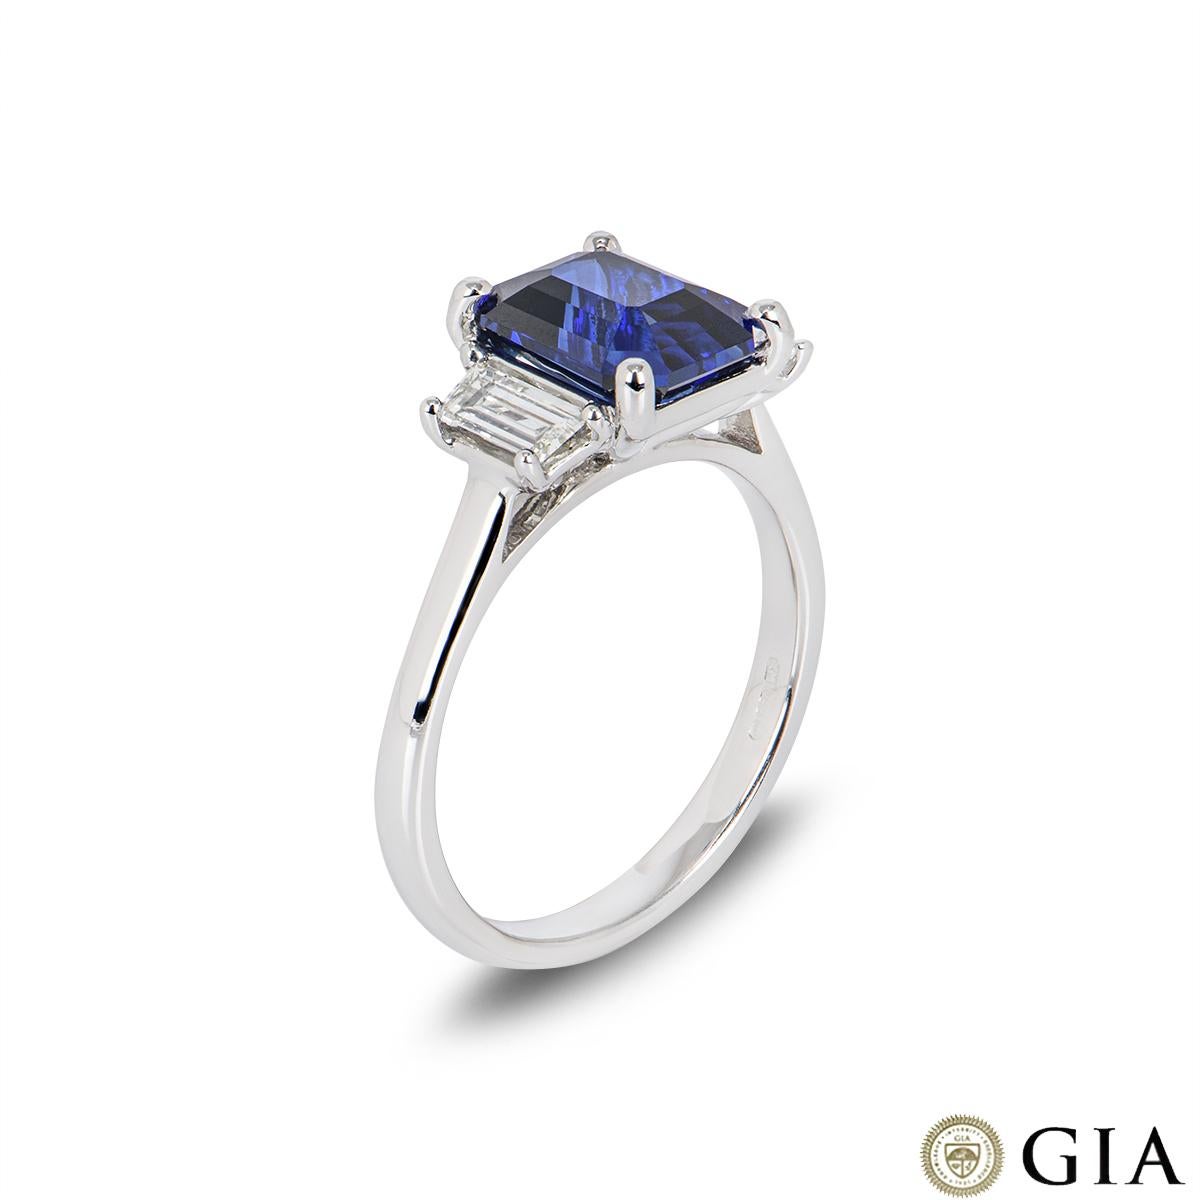 A beautiful 18k white gold royal blue sapphire and diamond ring. The royal blue octagonal step-cut sapphire weighs 3.04ct and displays signs of heat treatment. Set to either side of the sapphire are 2 tapered baguette cut diamonds with a total